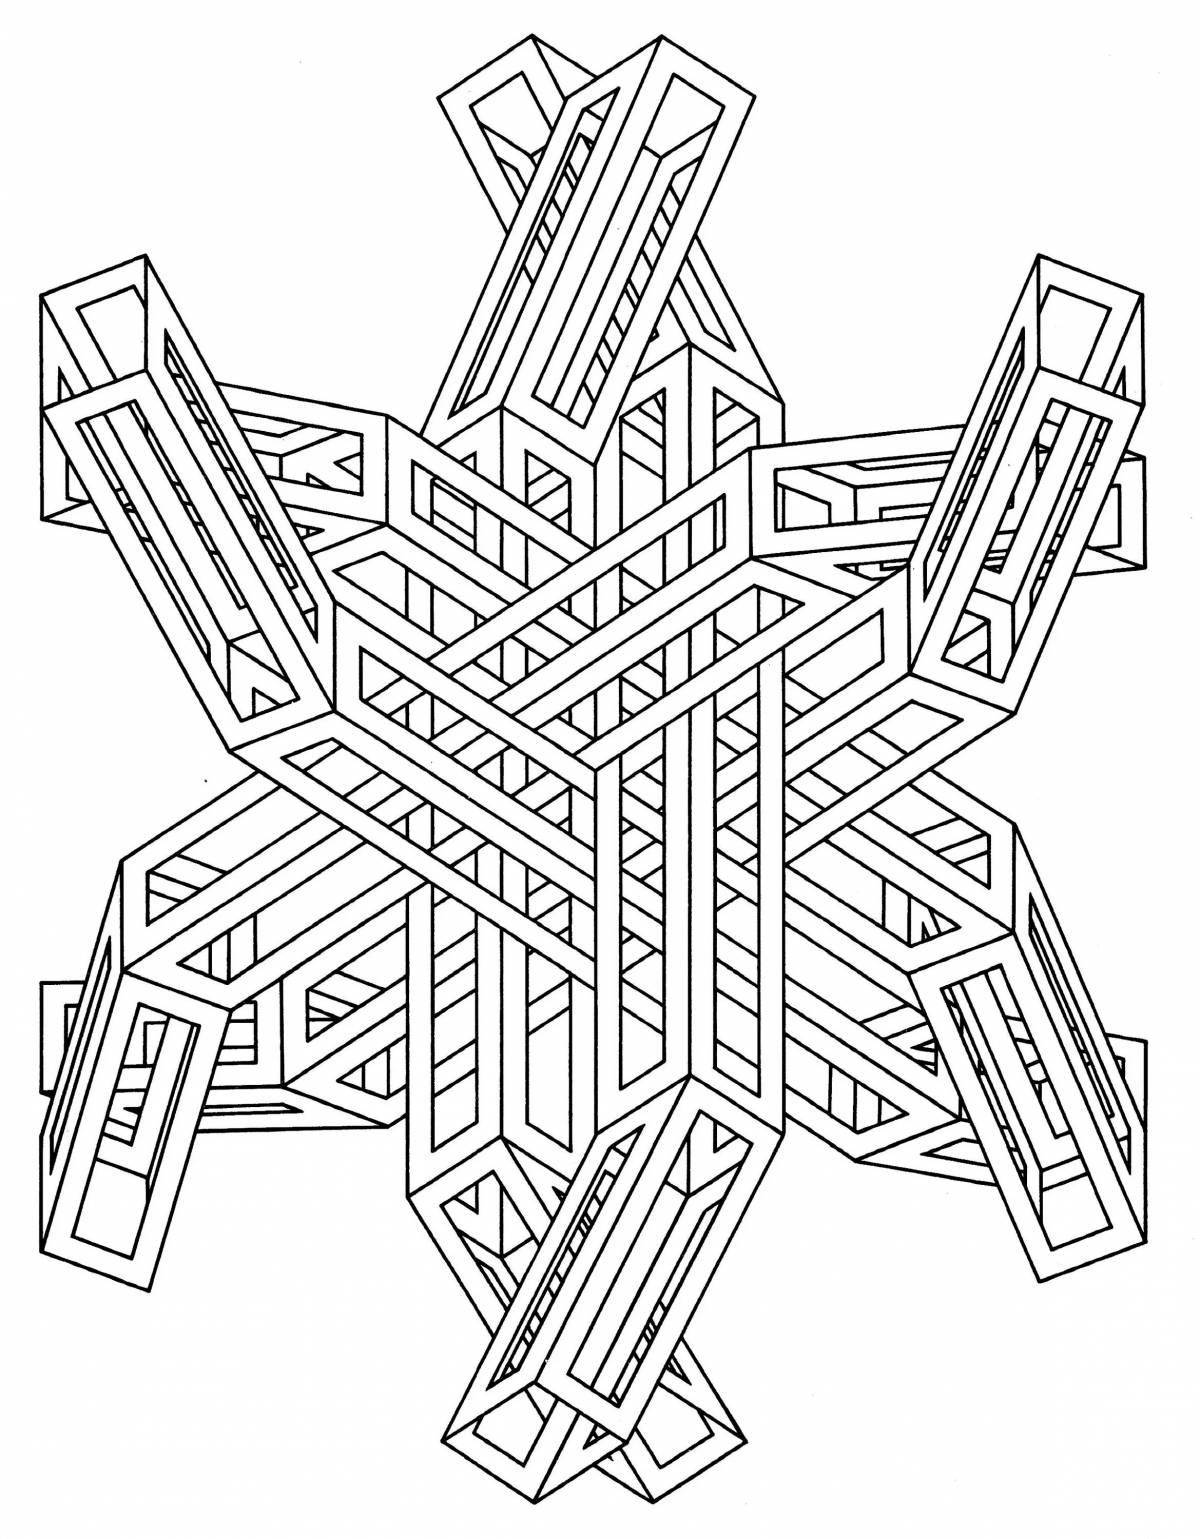 Coloring page with intricate geometric pattern